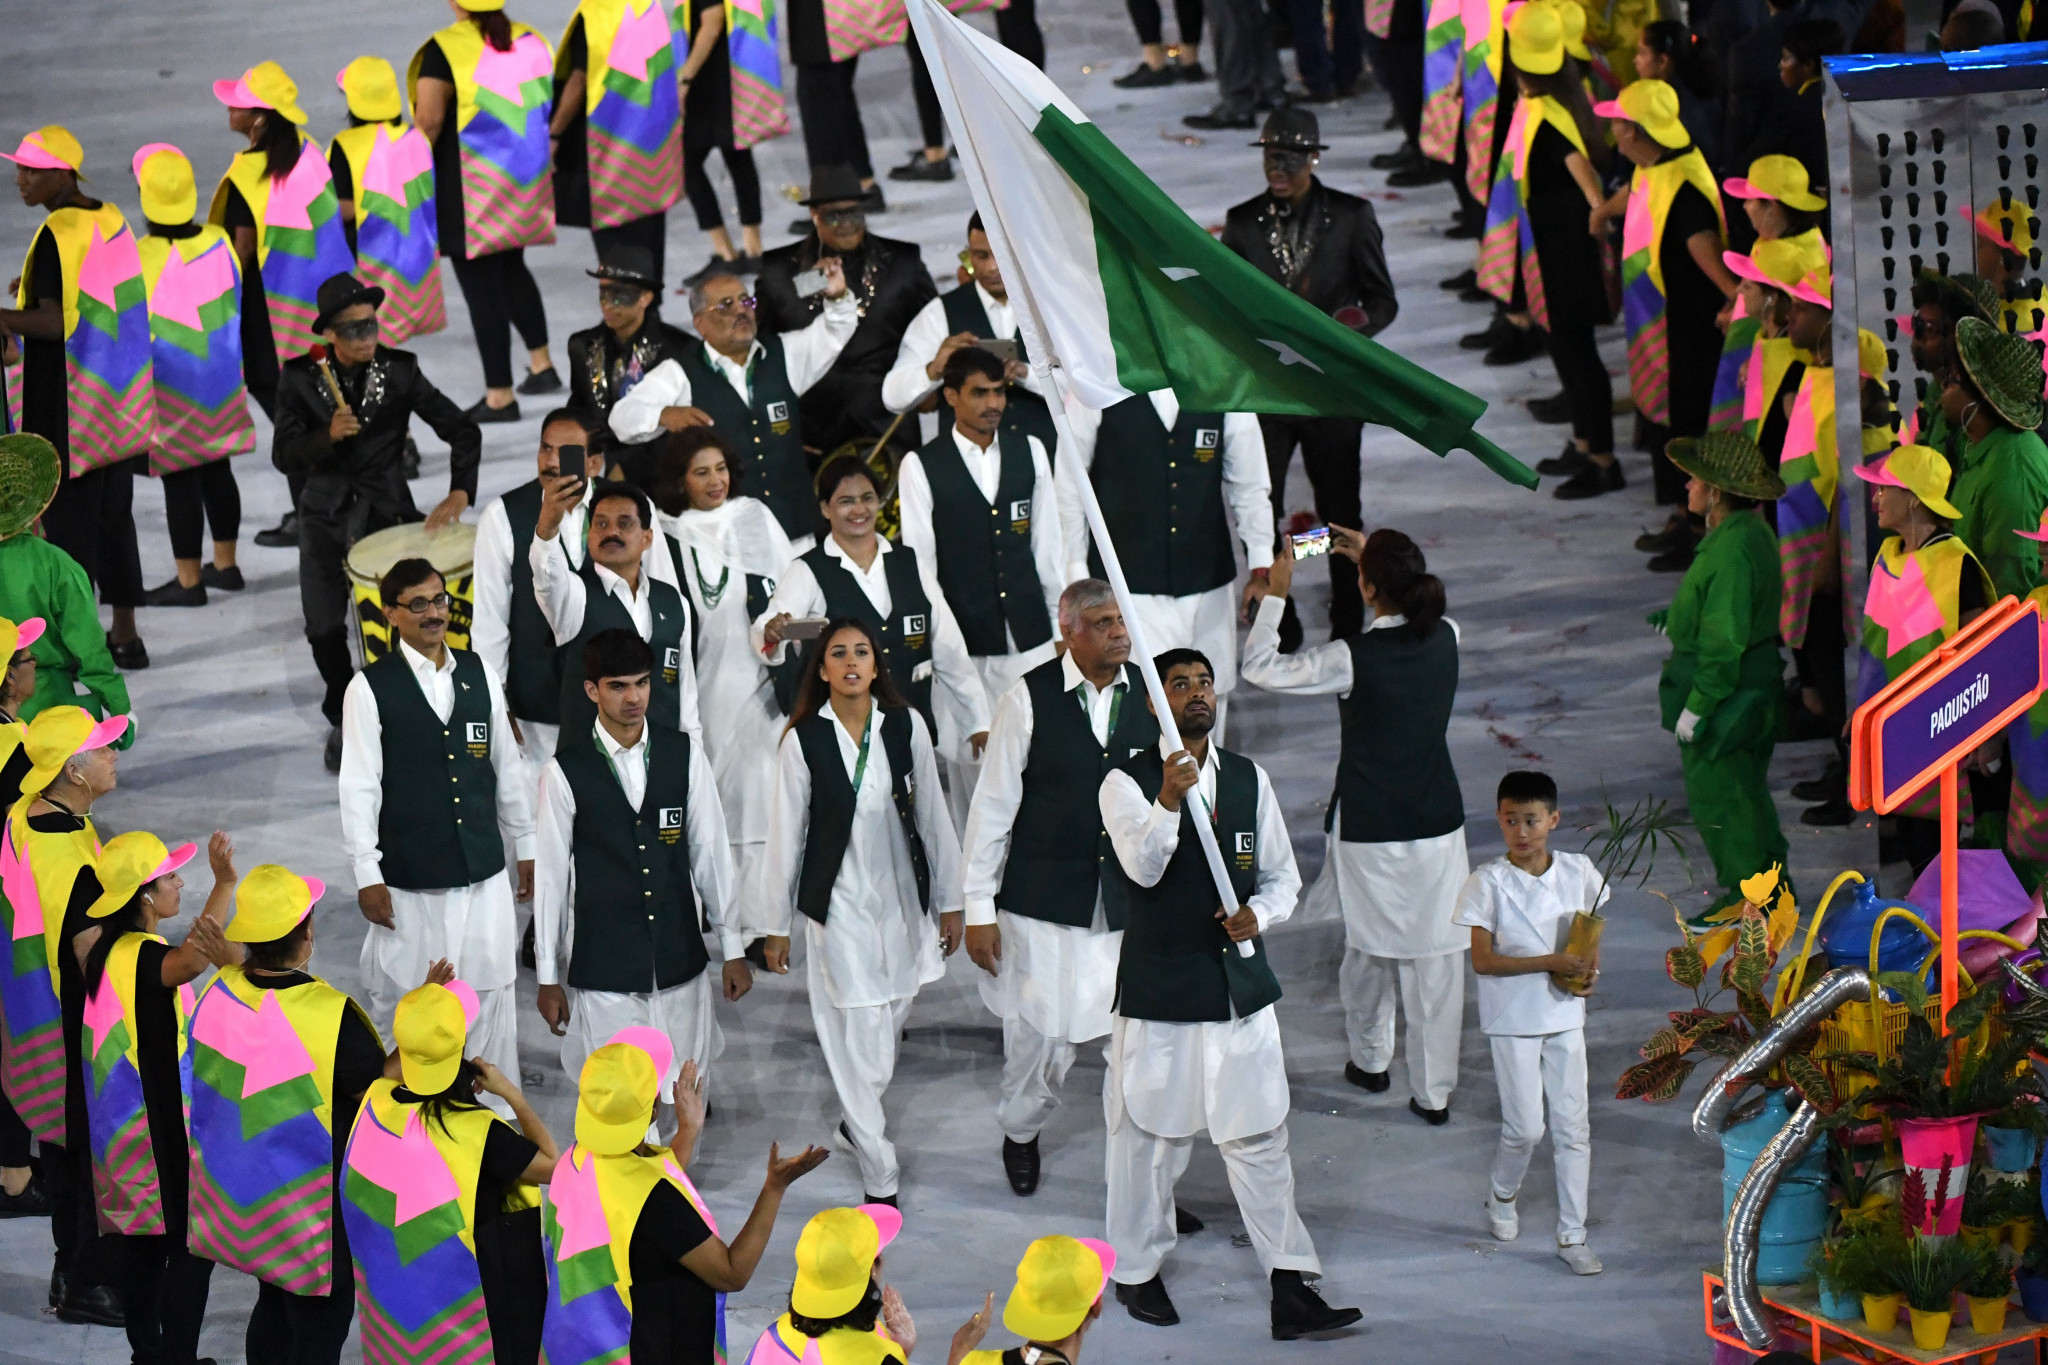 Ghulam Mustafa Bashir was Pakistan's flagbearer for the Opening Ceremony of the Rio 2016 Olympic Games ©Getty Images